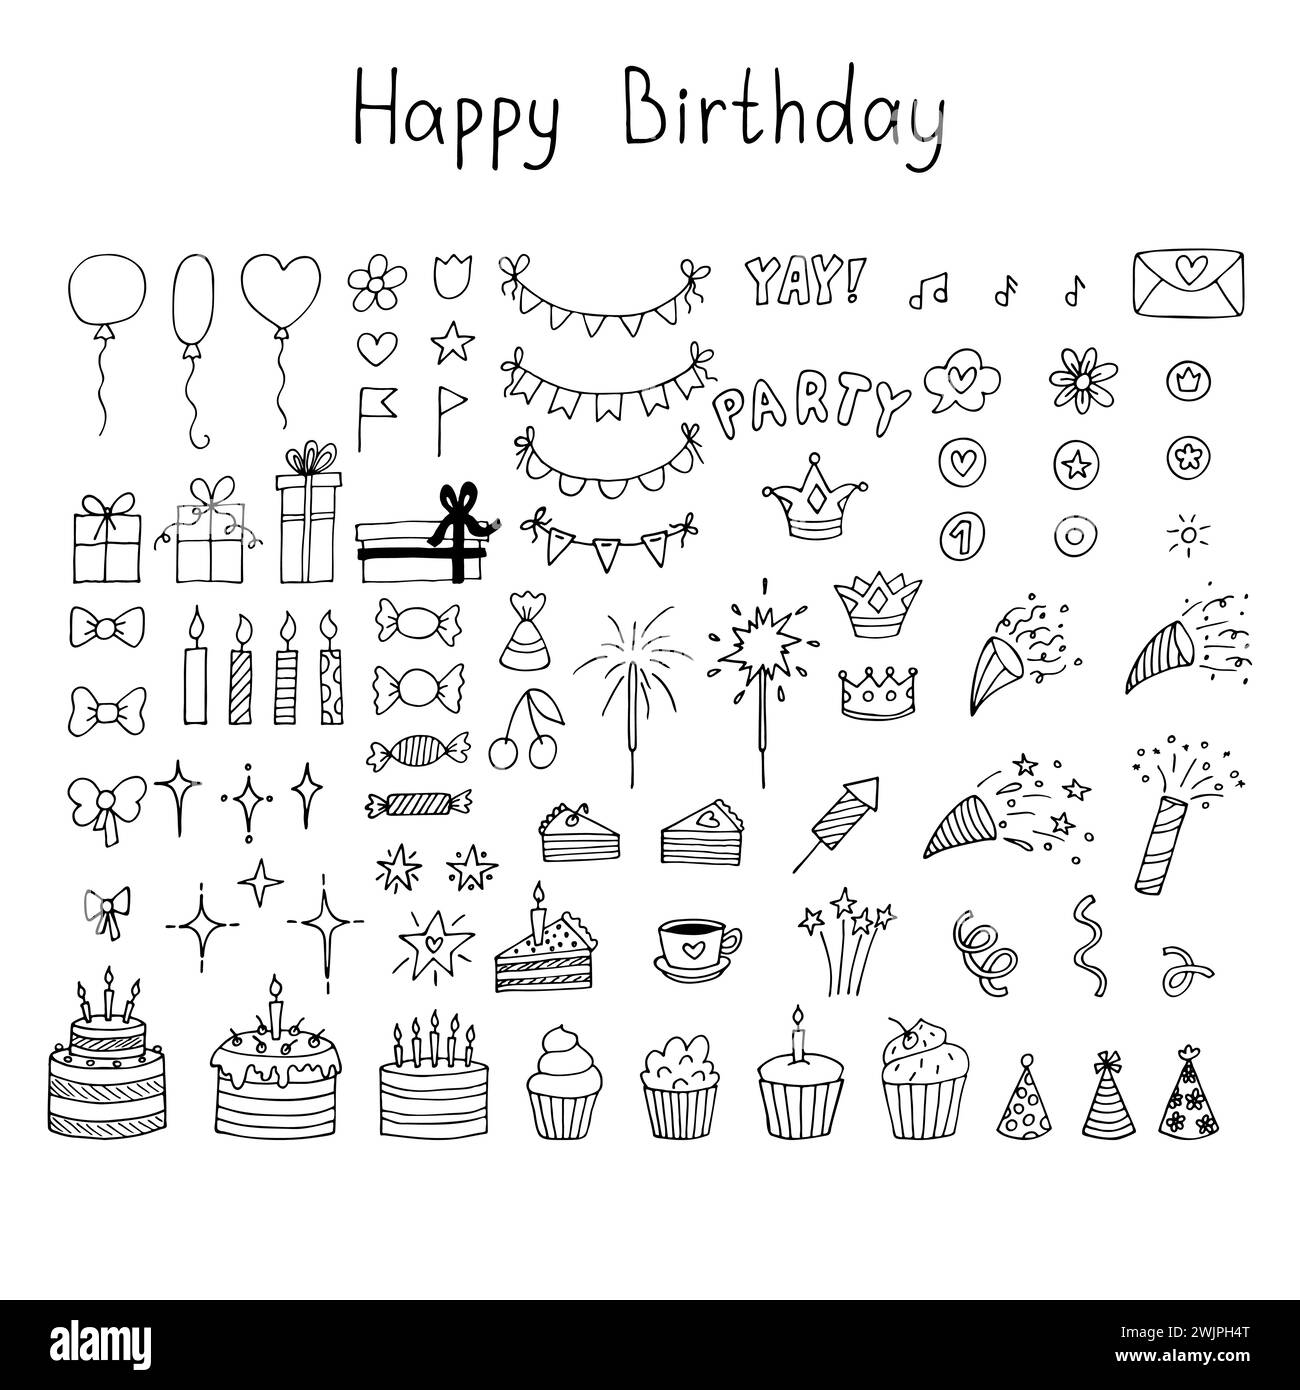 Set of hand drawn birthday party design elements. Balloons, cakes, cupcakes, gifts, candles, bows and festive attributes. Happy Birthday. Vector illus Stock Vector